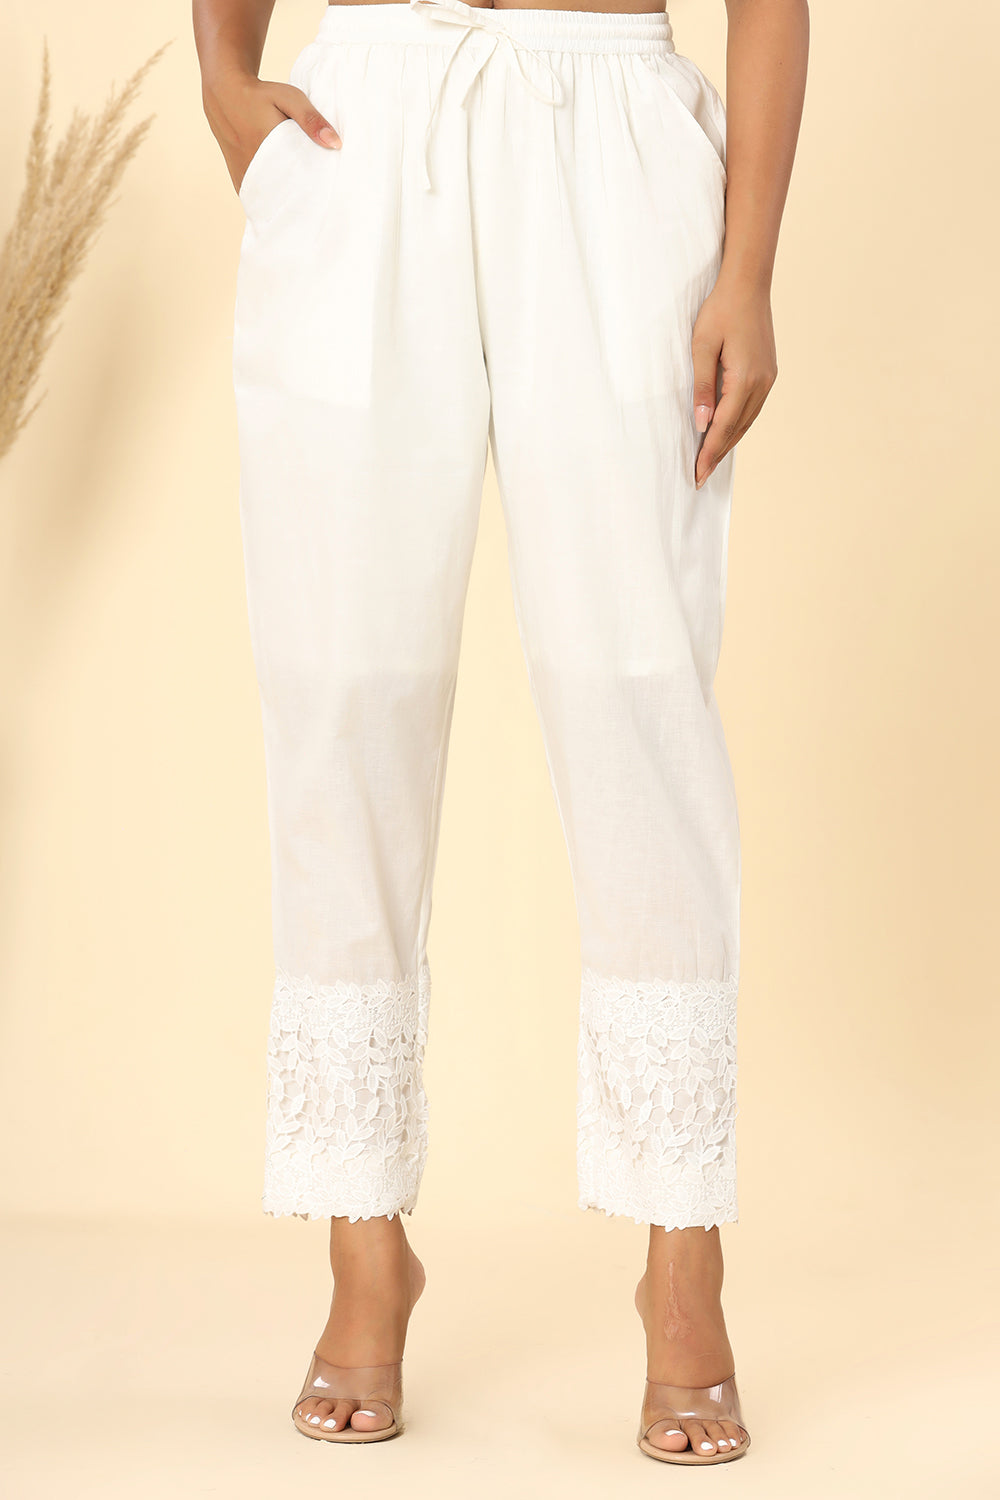 Pearl White Lace Pant